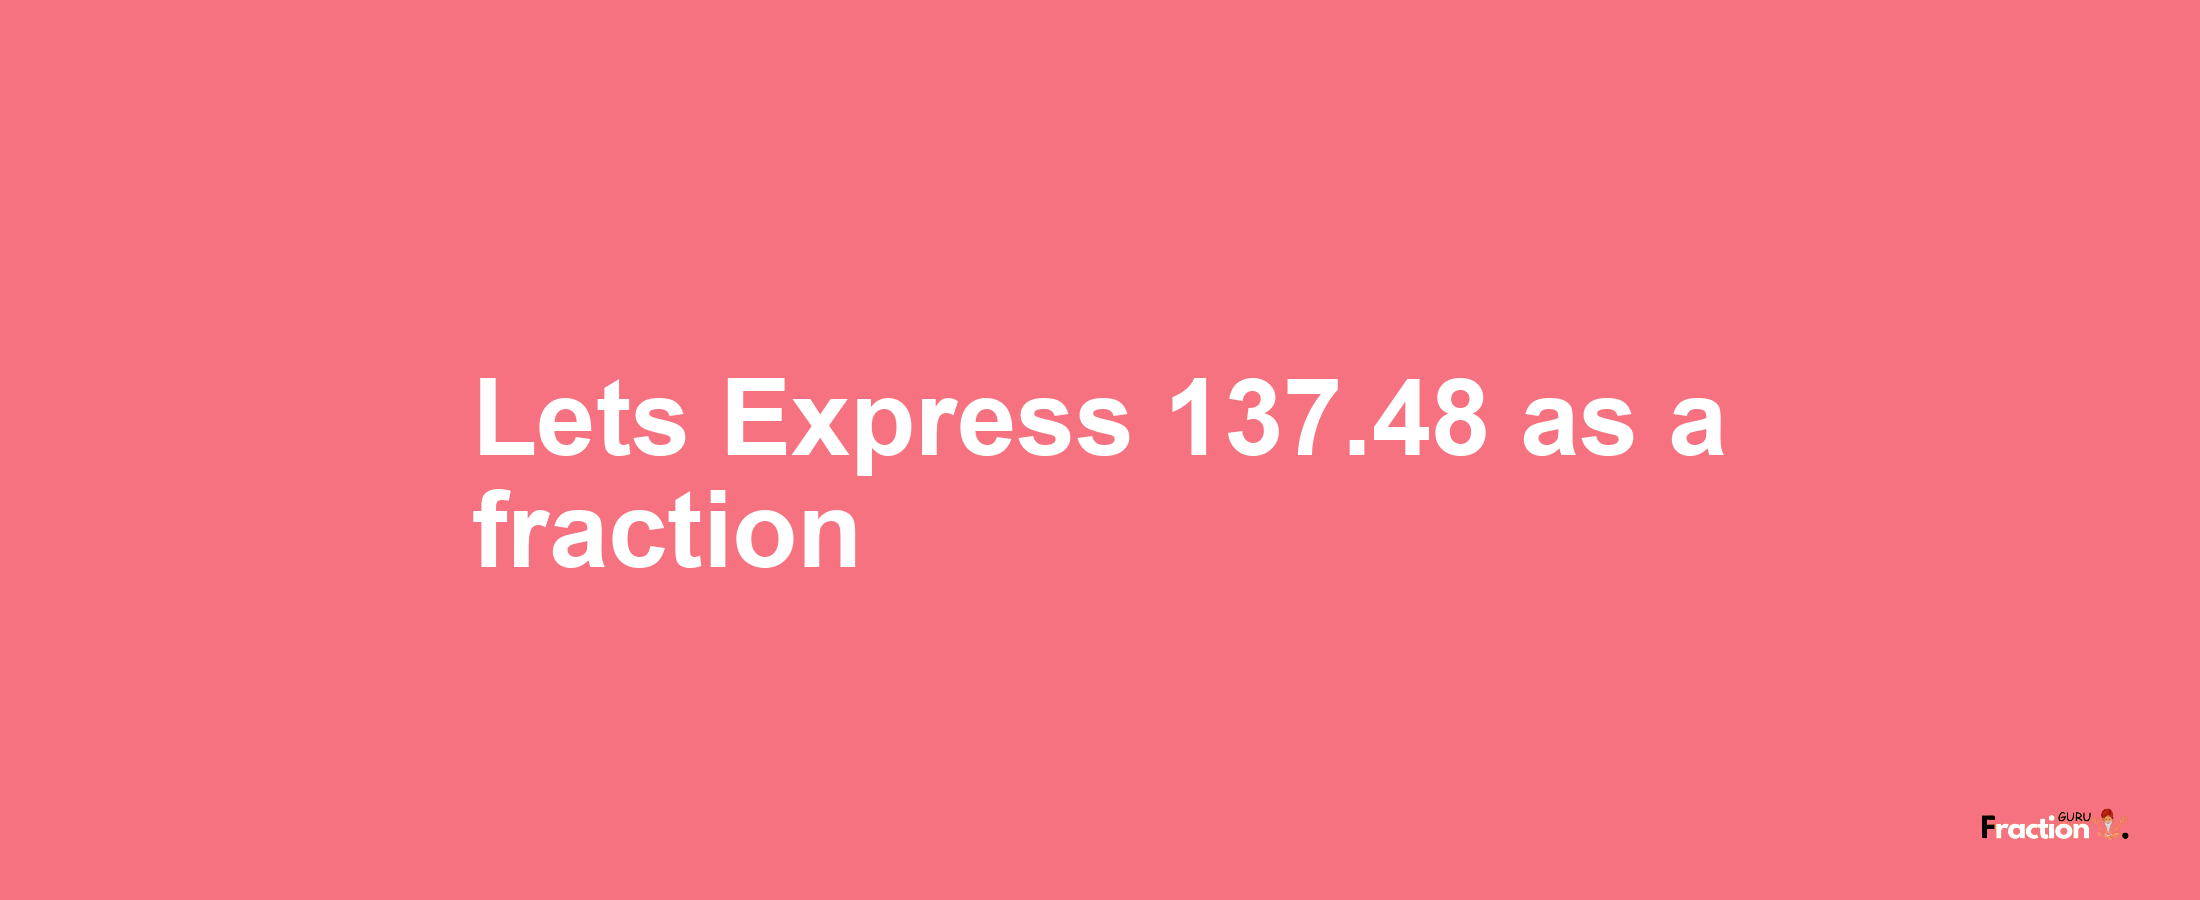 Lets Express 137.48 as afraction